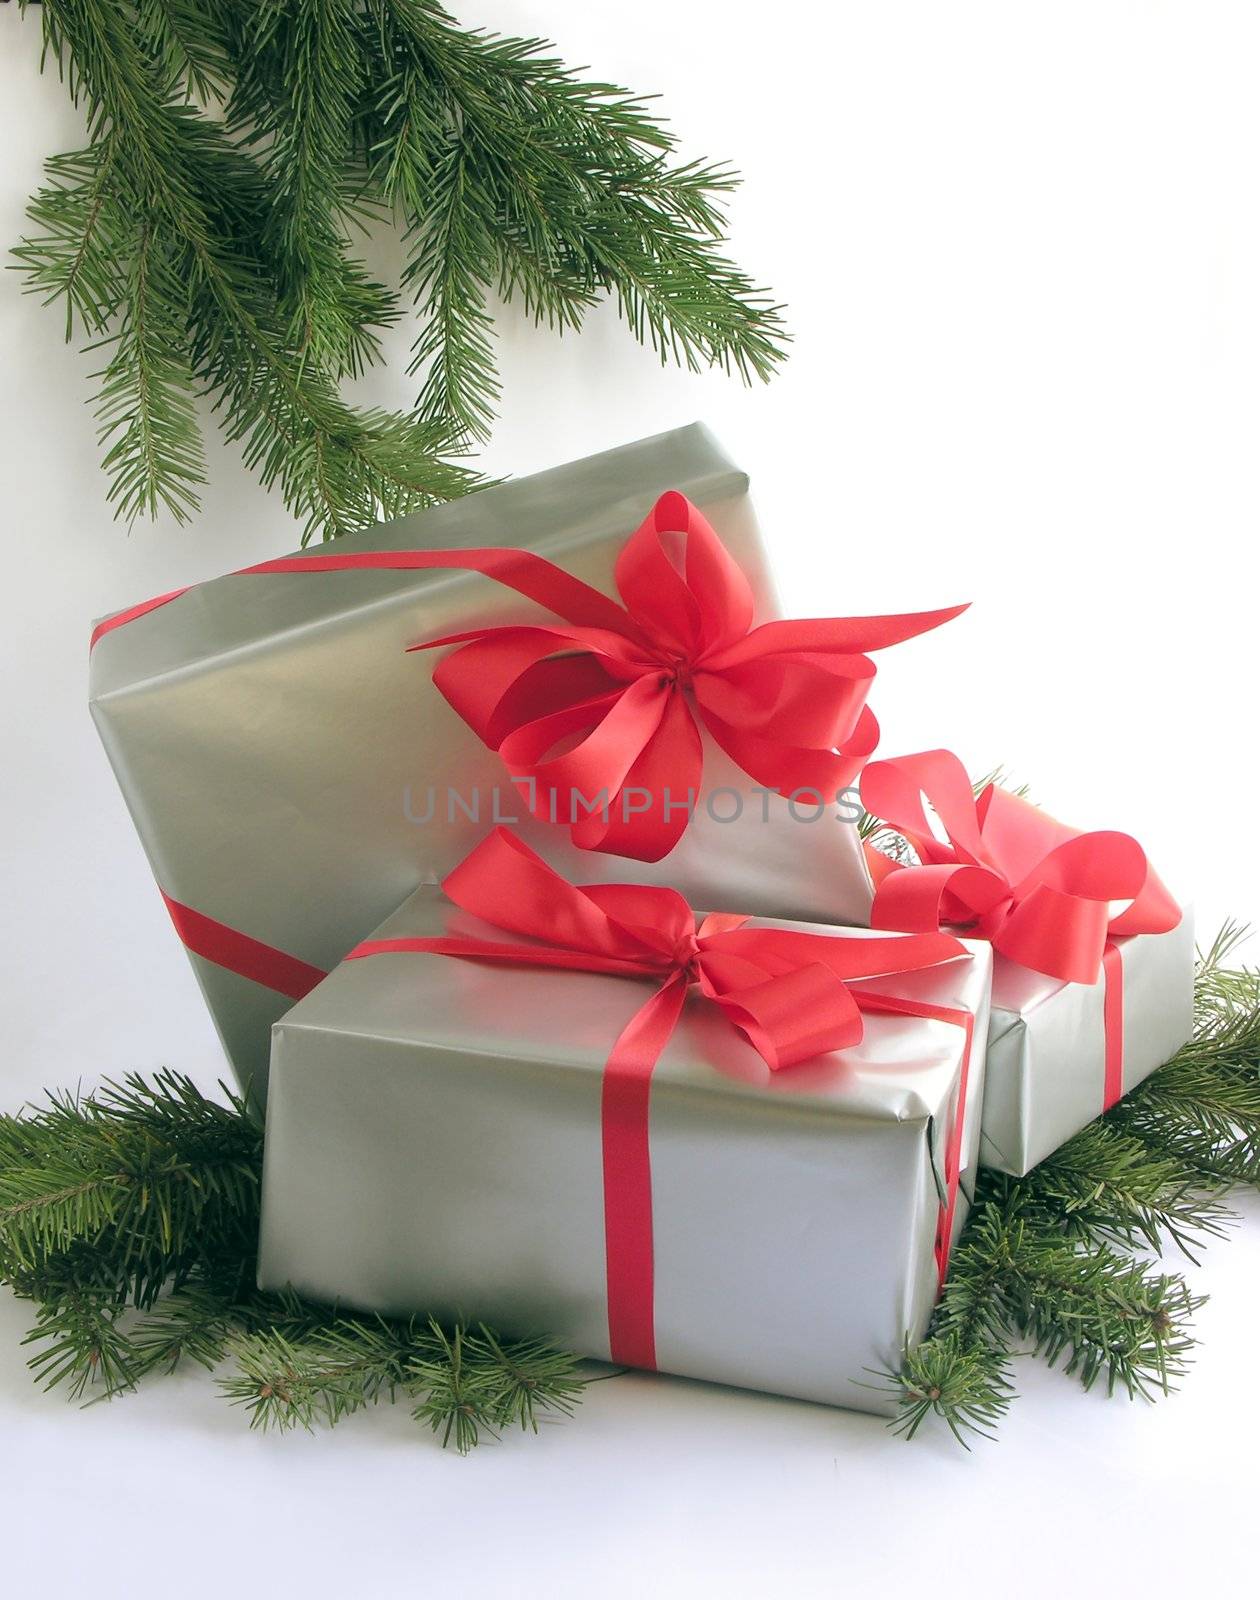 Christmas gifts in silver paper